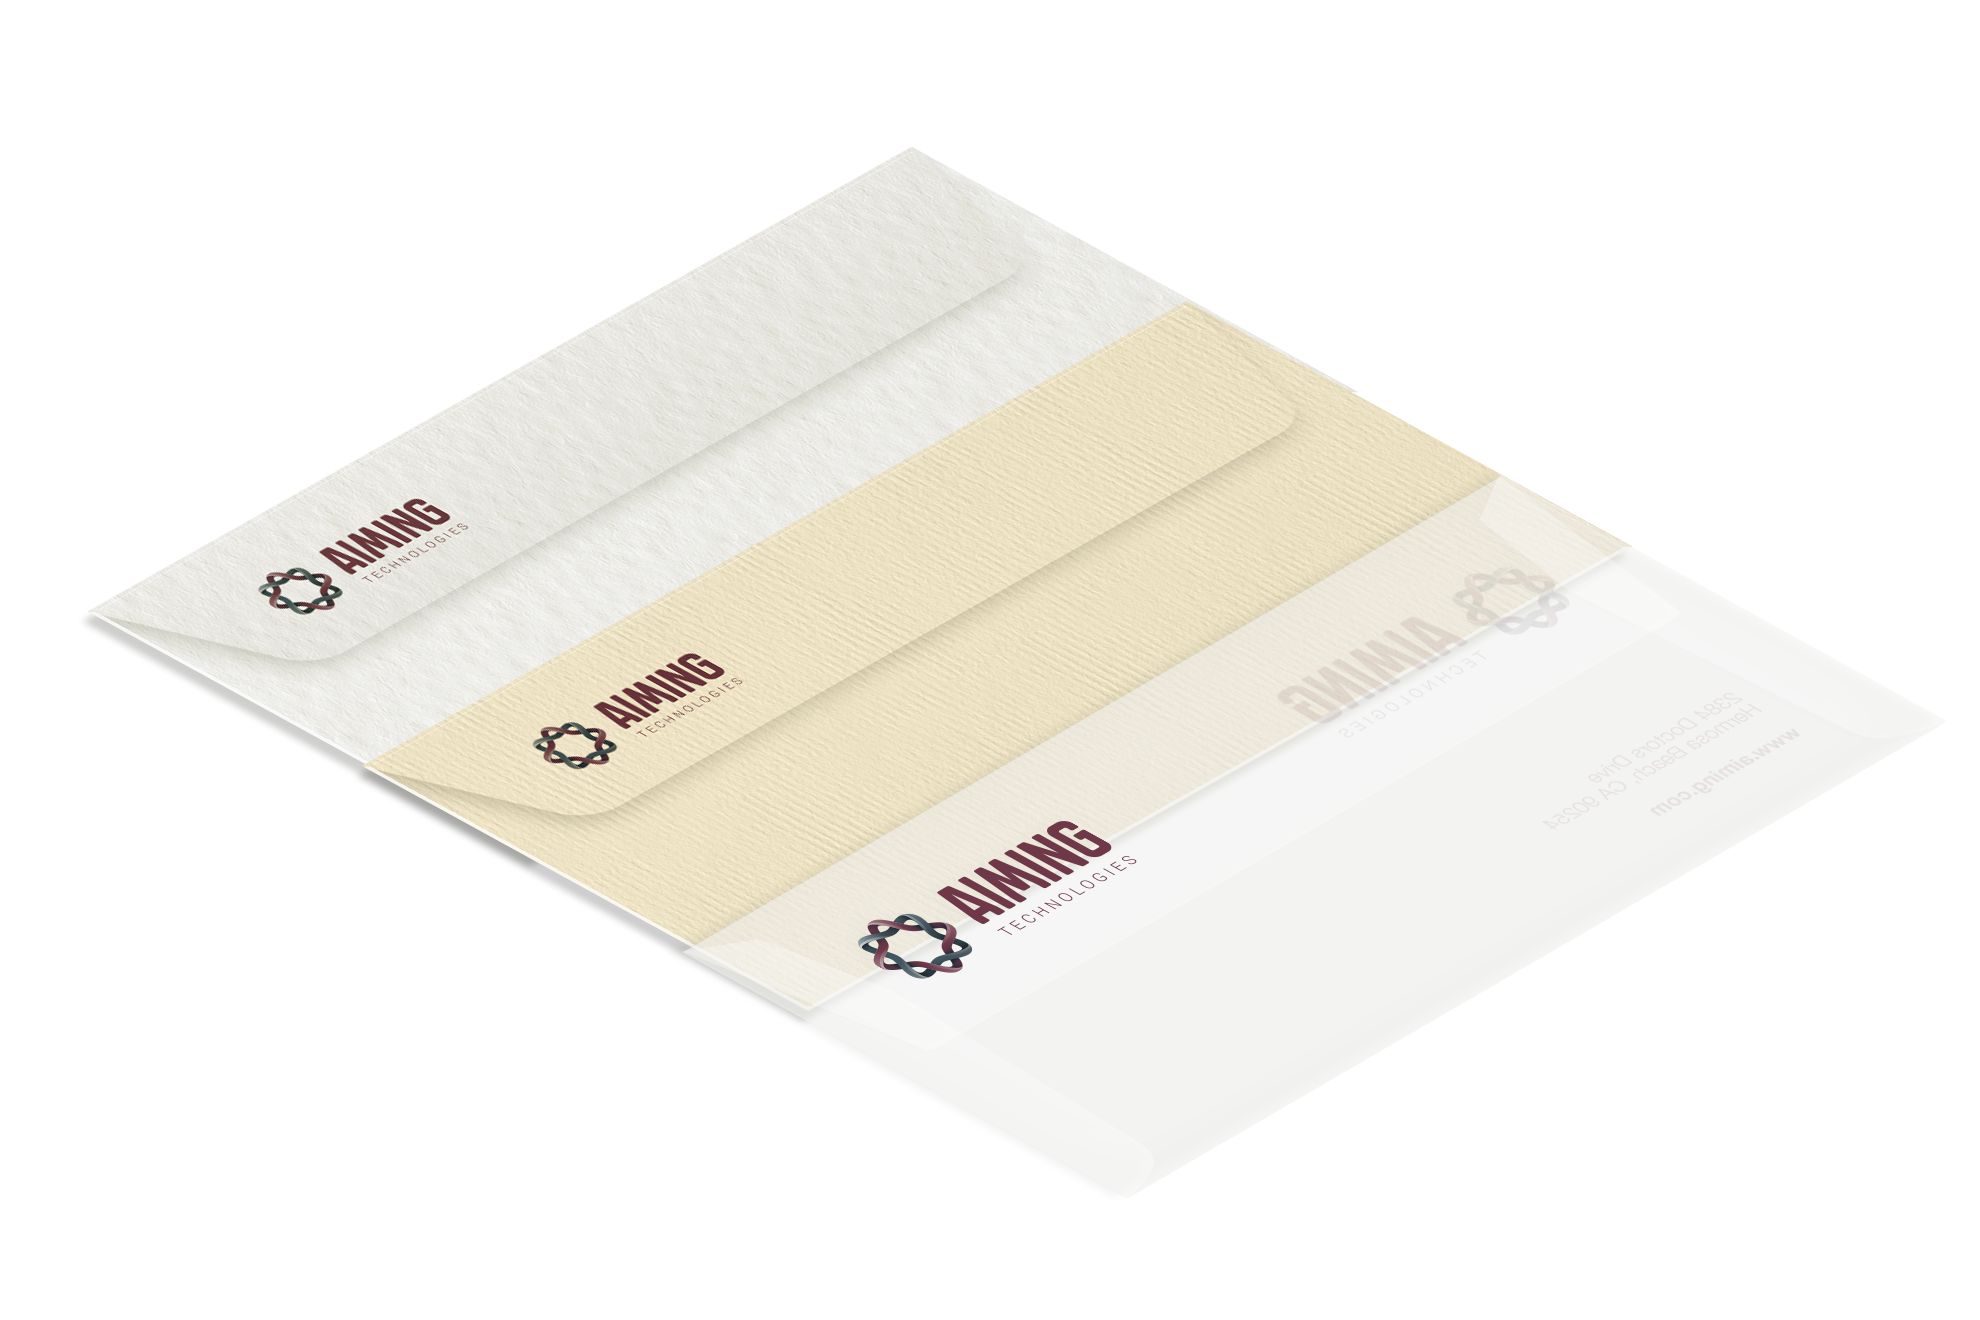 Envelopes in textured paper: * Envelopes in white, ivory or embossed papers
* Many formats and types
* Used for corporate documents and invitations